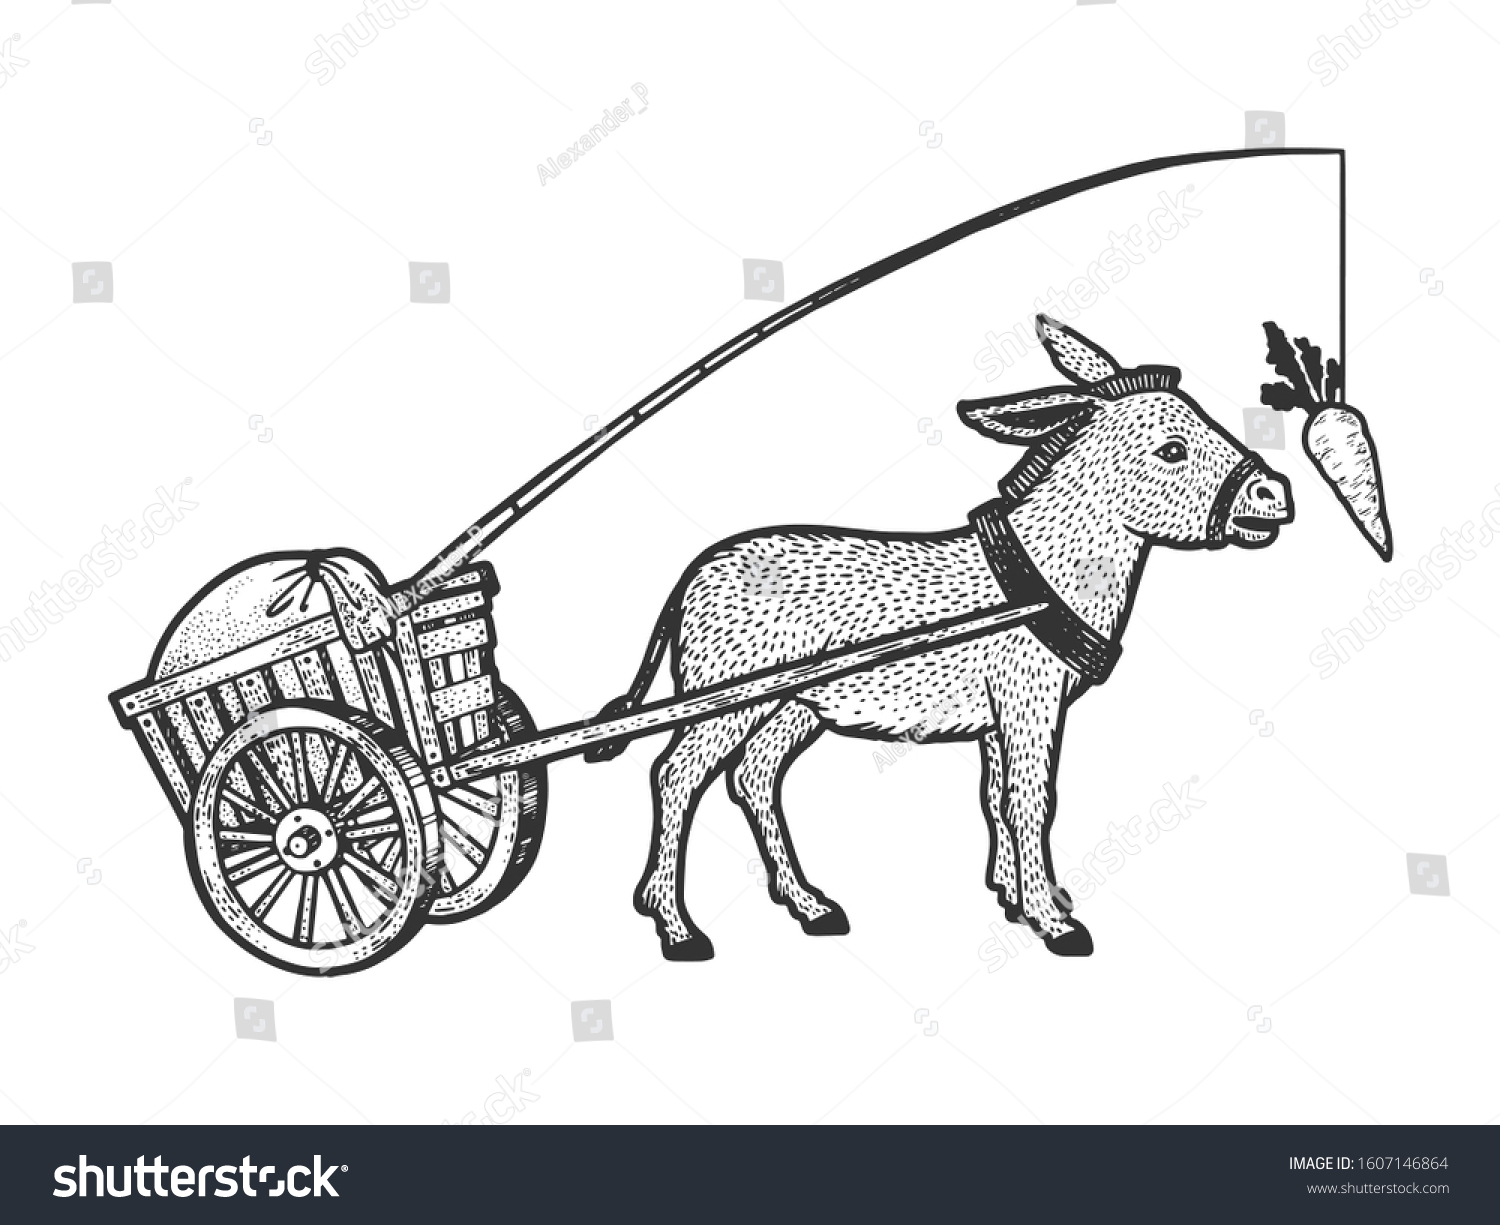 SVG of Donkey chasing carrot that is tied to him and drags cart with load sketch engraving vector illustration. T-shirt apparel print design. Scratch board style imitation. Black and white hand drawn image. svg